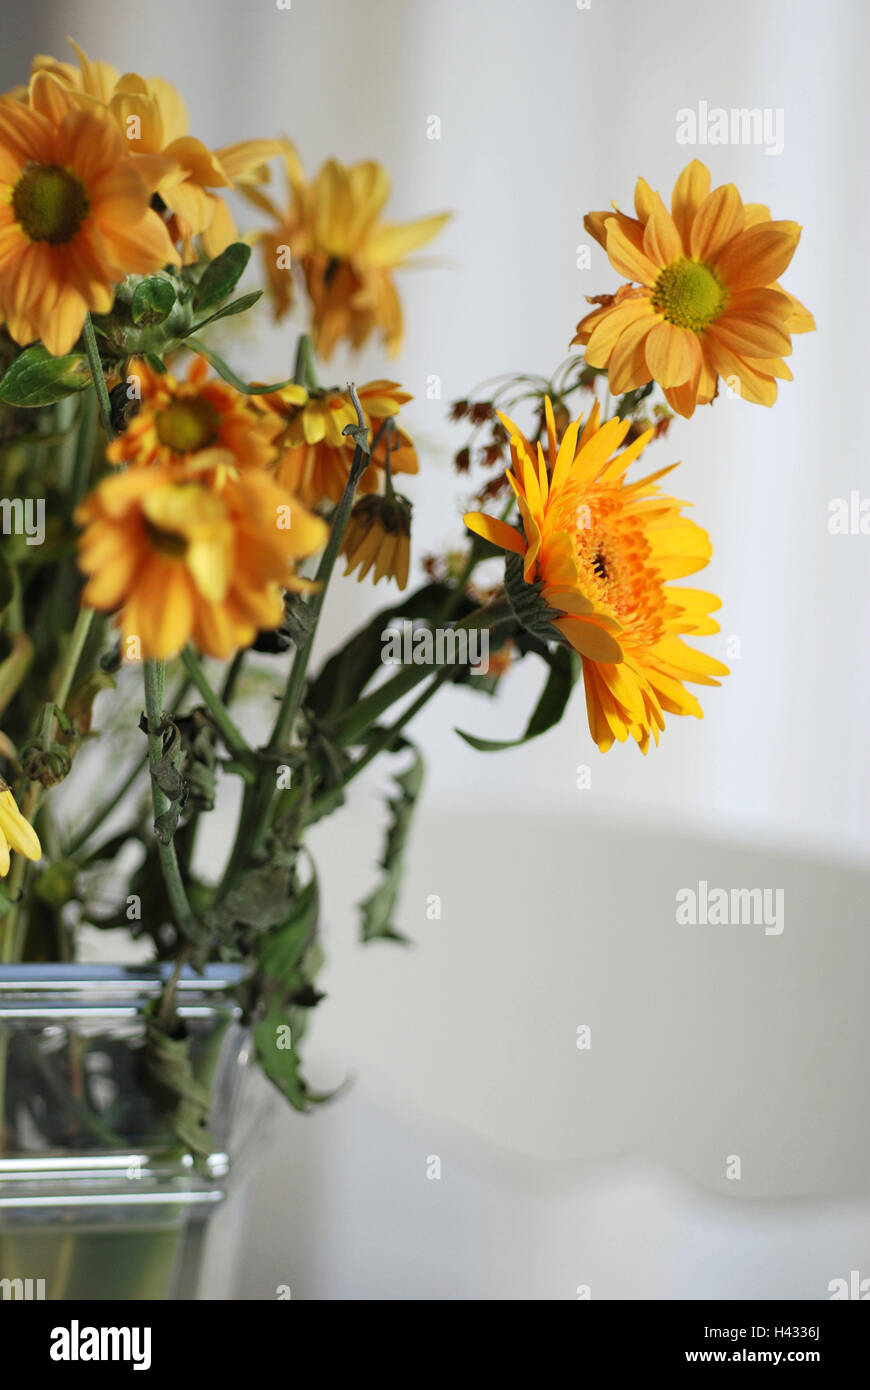 Flower vase, oxeye daisys, yellow, detail, vase, flowers, flower heads, blossoms, blossom, wilt withered, icon, present, Mother's Day, Valentin, Excuse me, joy, birthday, product photography, Stock Photo